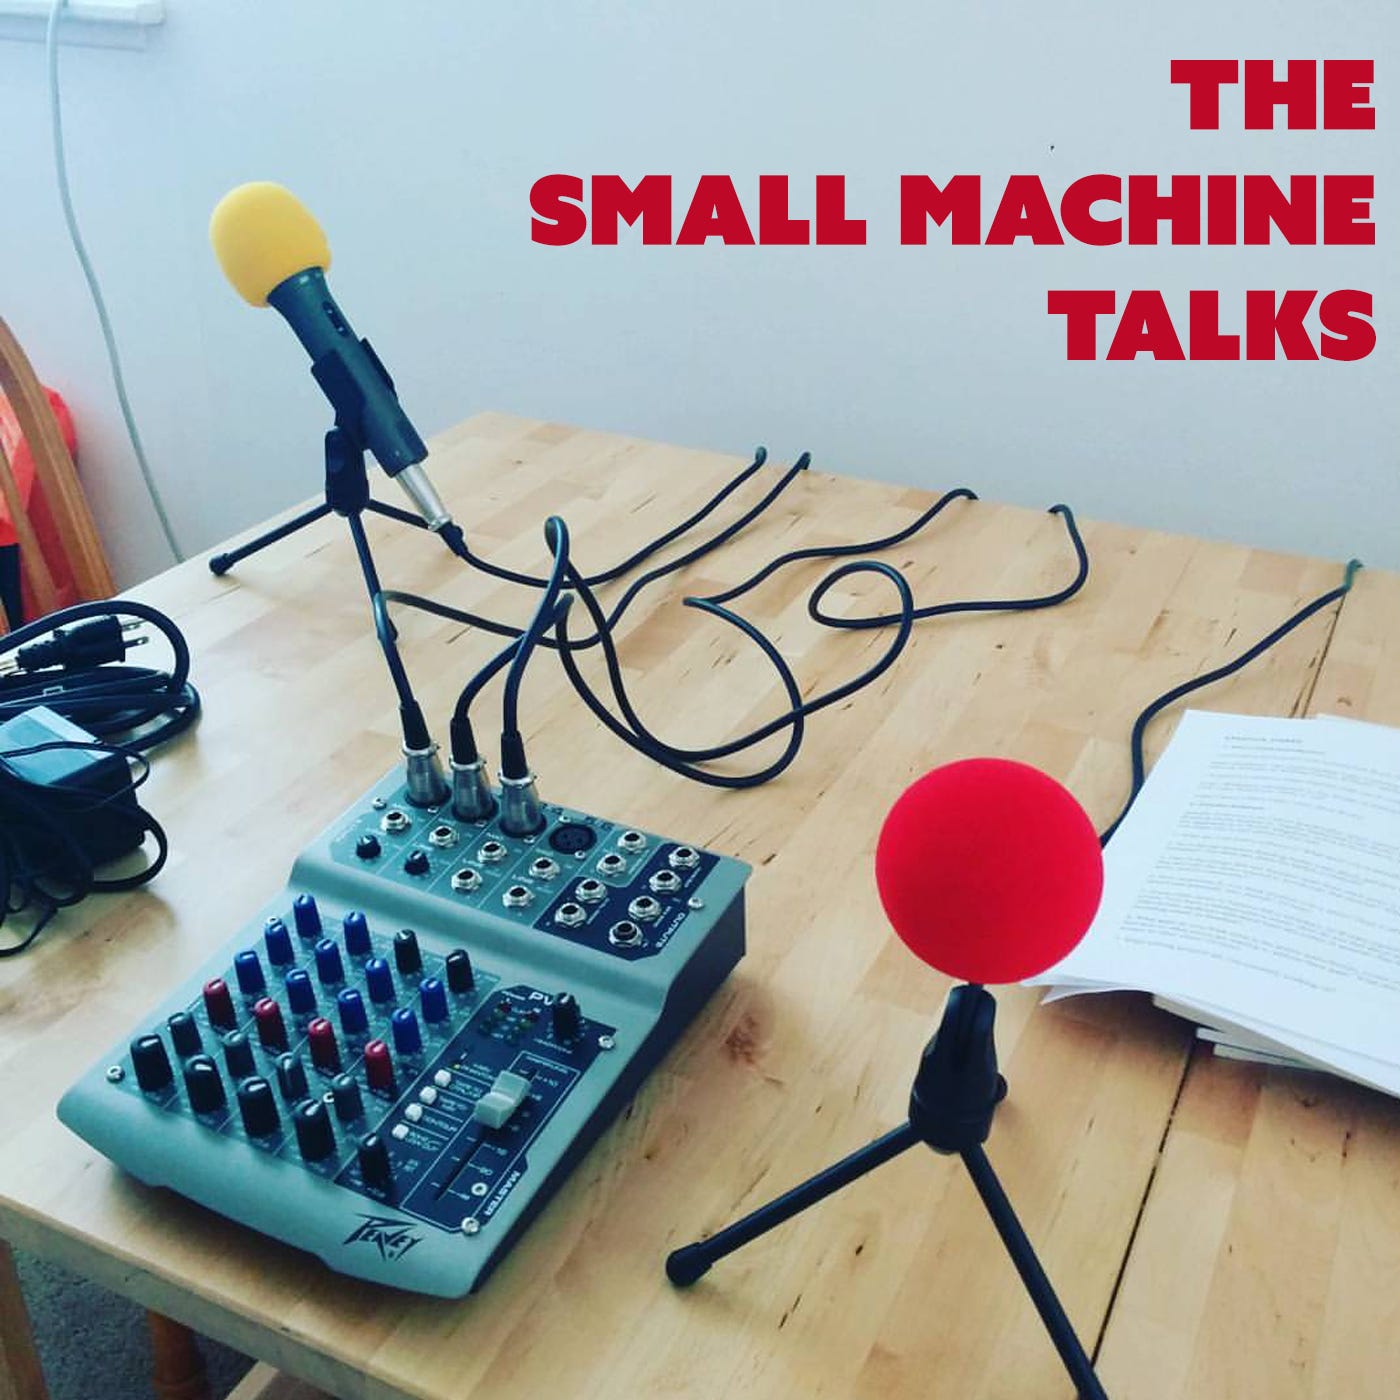 TEXT: THE SMALL MACHINE TALKS. IMAGE: microphones, sound equipment and papers on a wooden table